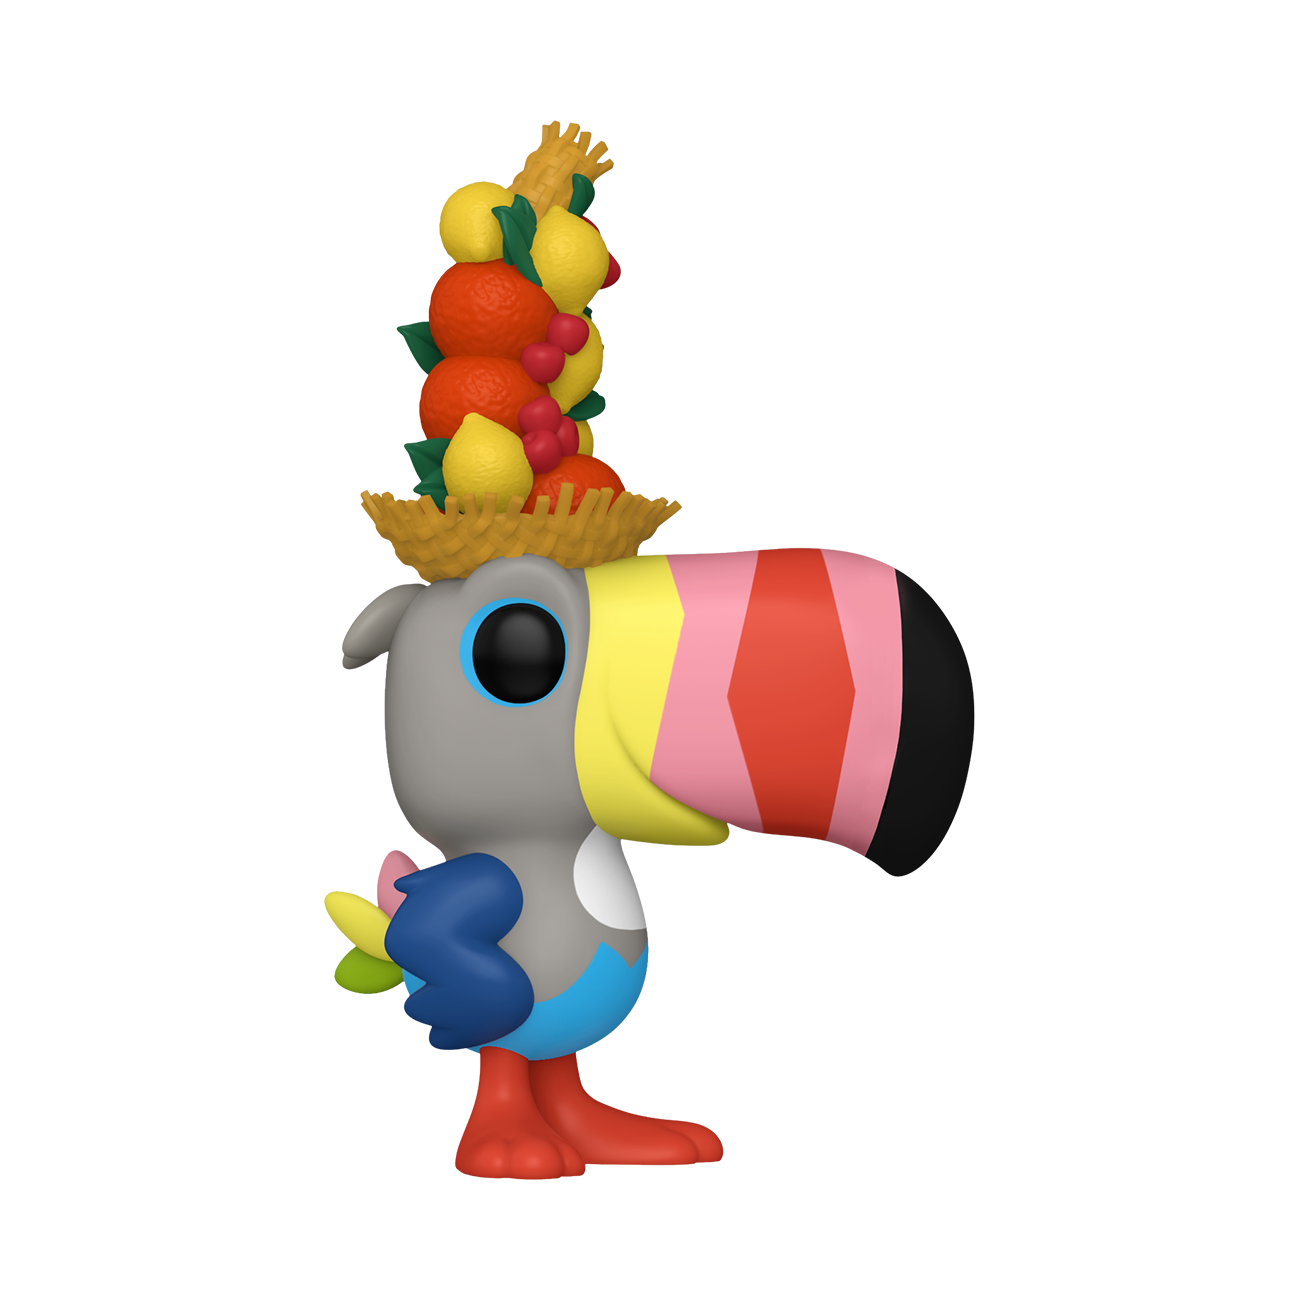 Pop! Toucan Sam wearing a festive hat filled with colorful fruit.